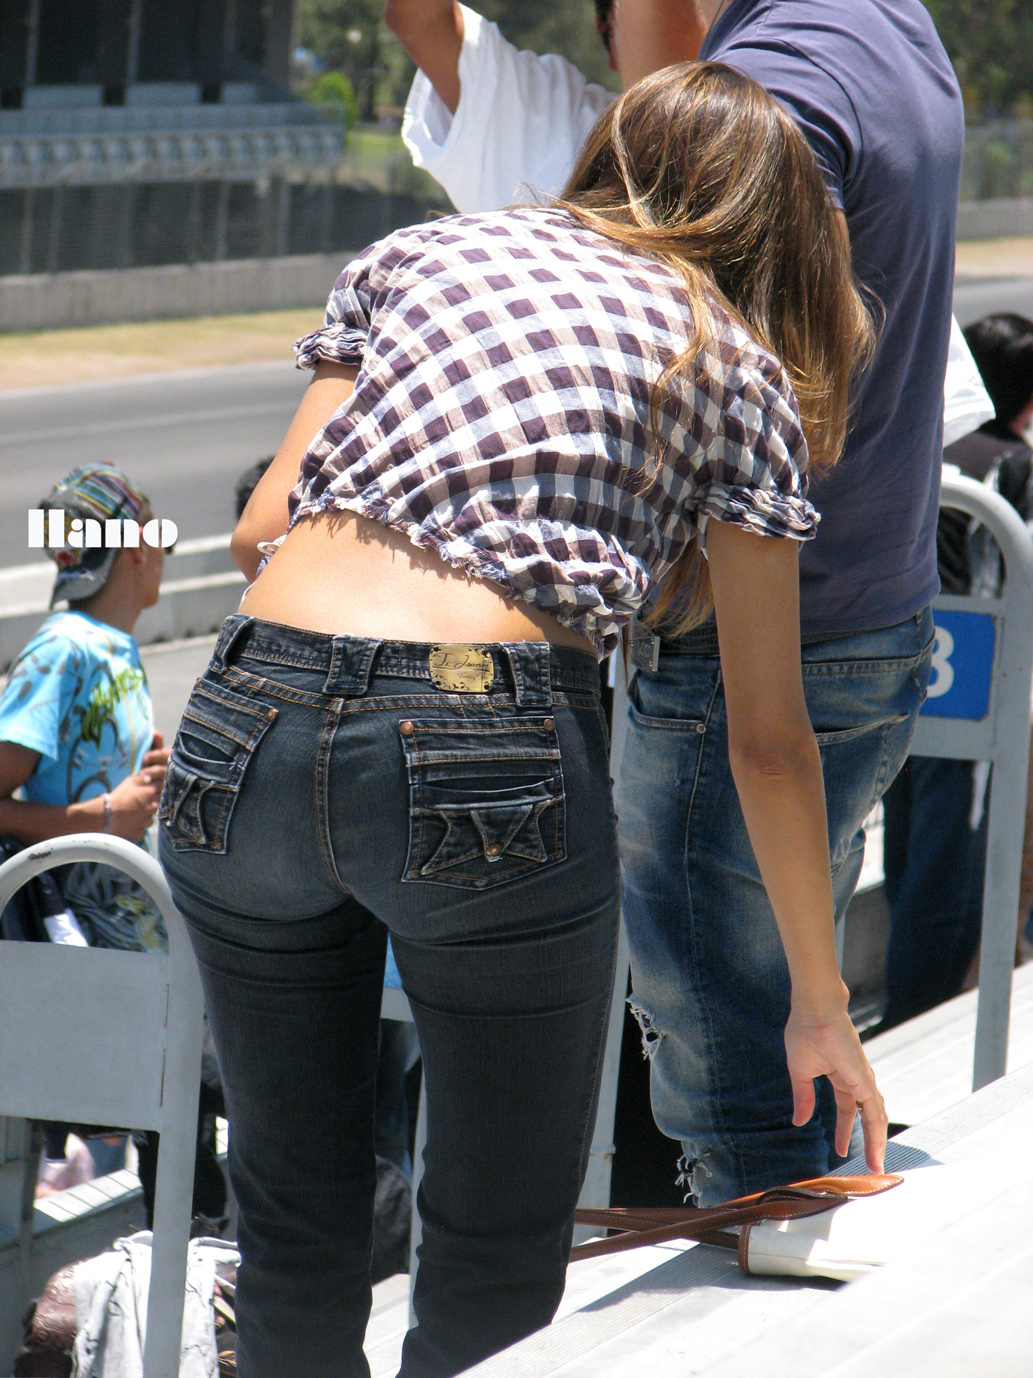 Teen asses in jeans